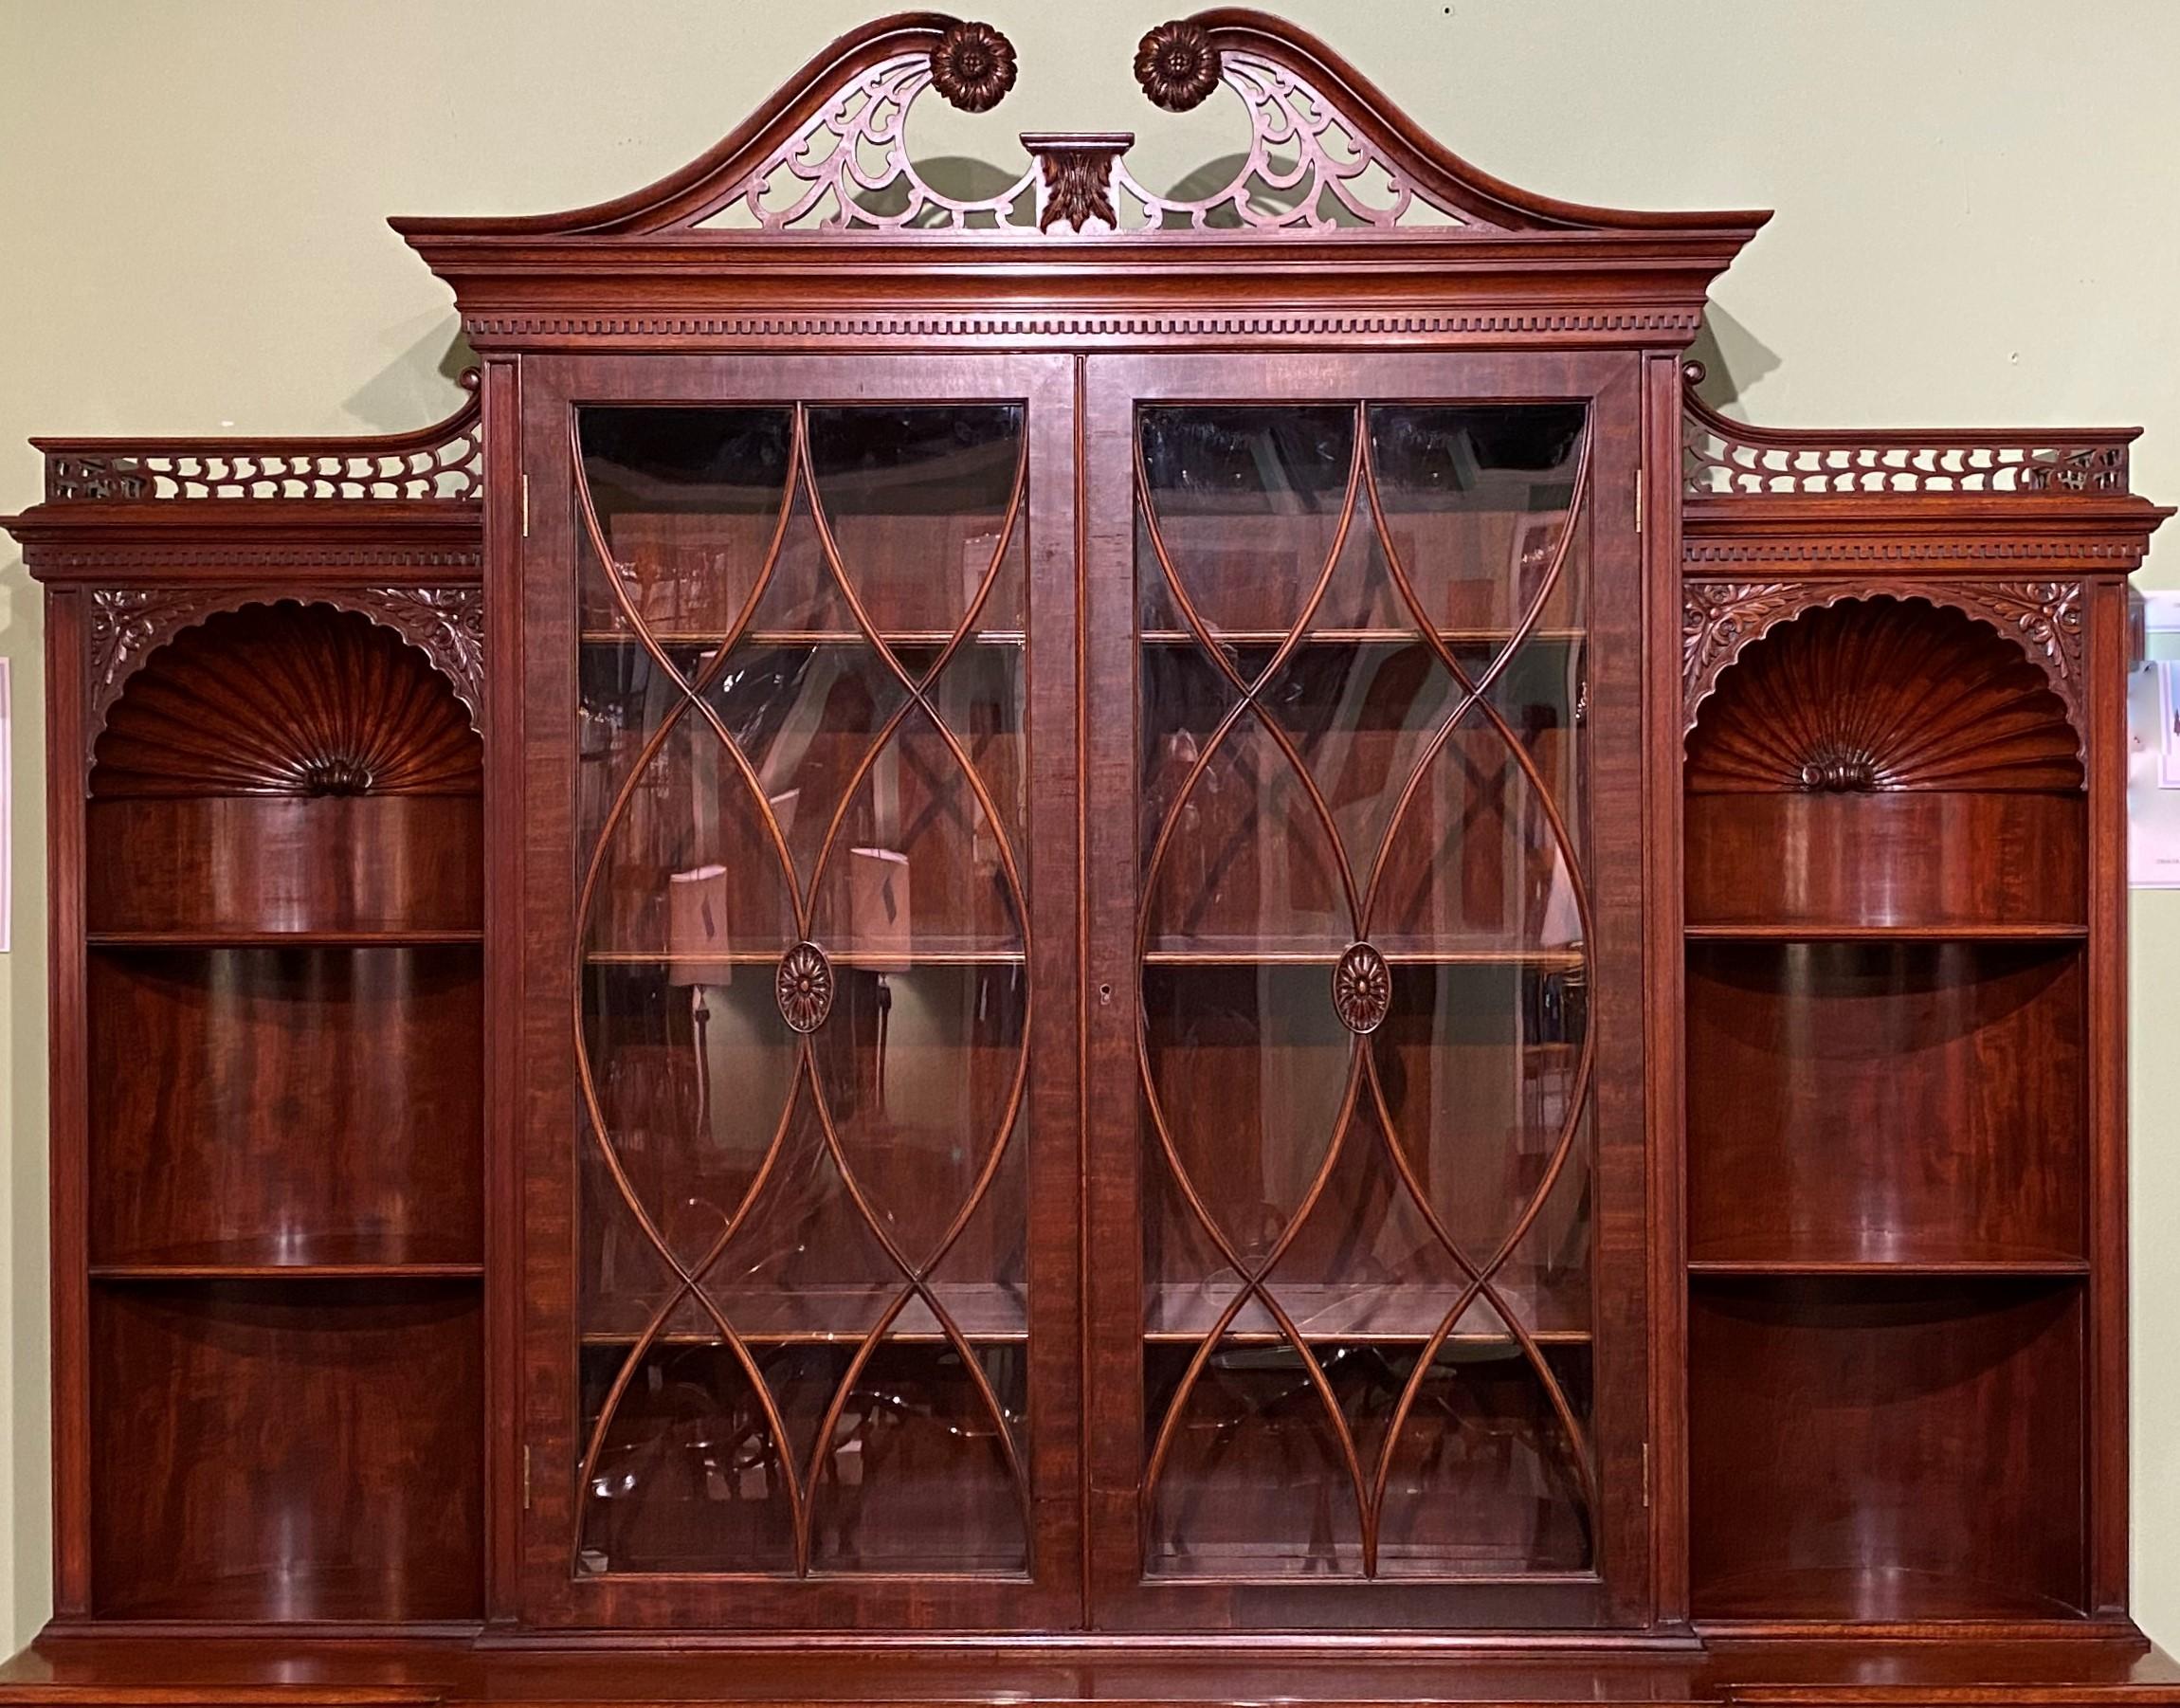 An exceptional custom two part mahogany breakfront server cabinet or bookcase by Joseph Gerte of Boston, MA, its upper case featuring a crest with center swan’s neck broken arch pediment with carved rosettes and foliate fretwork, surmounting a